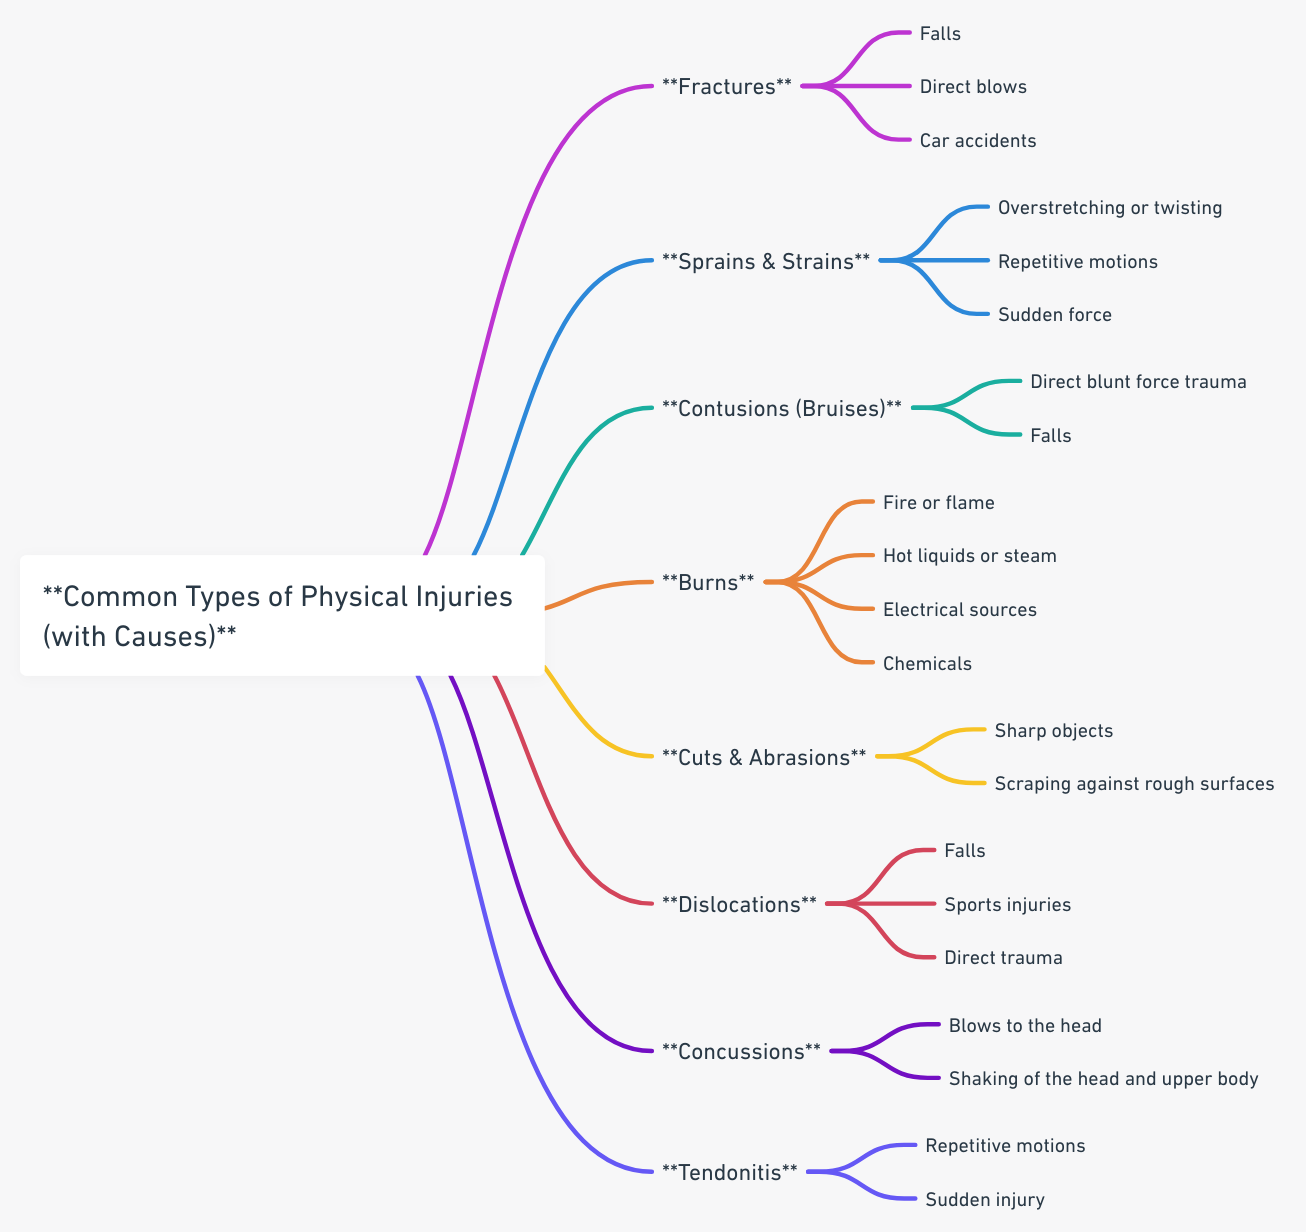 a mindmap detailing the most common types of physical injuries along with their causes 